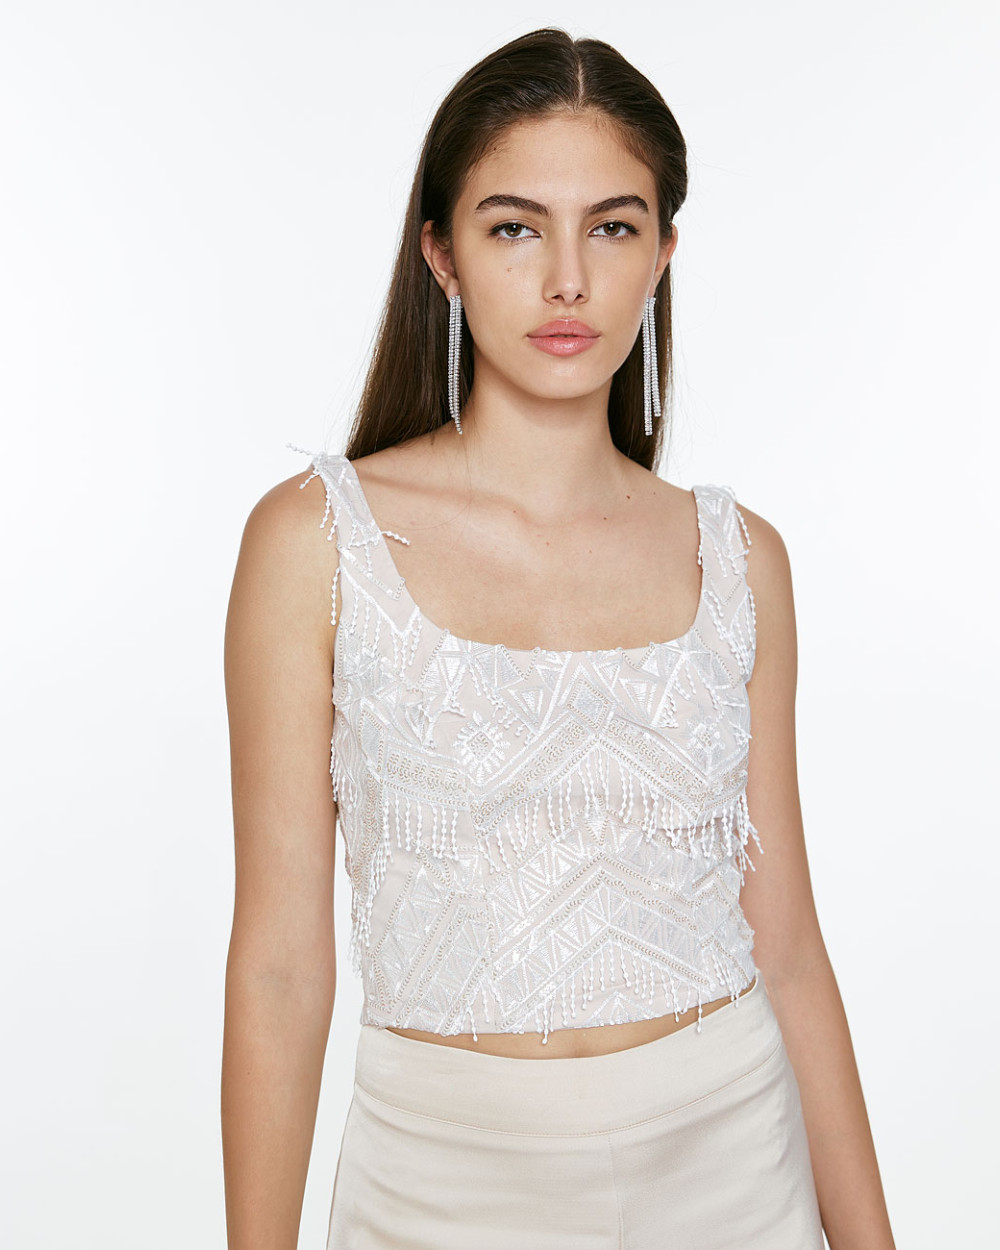 Crop top with fringes - Access Fashion - Brouska